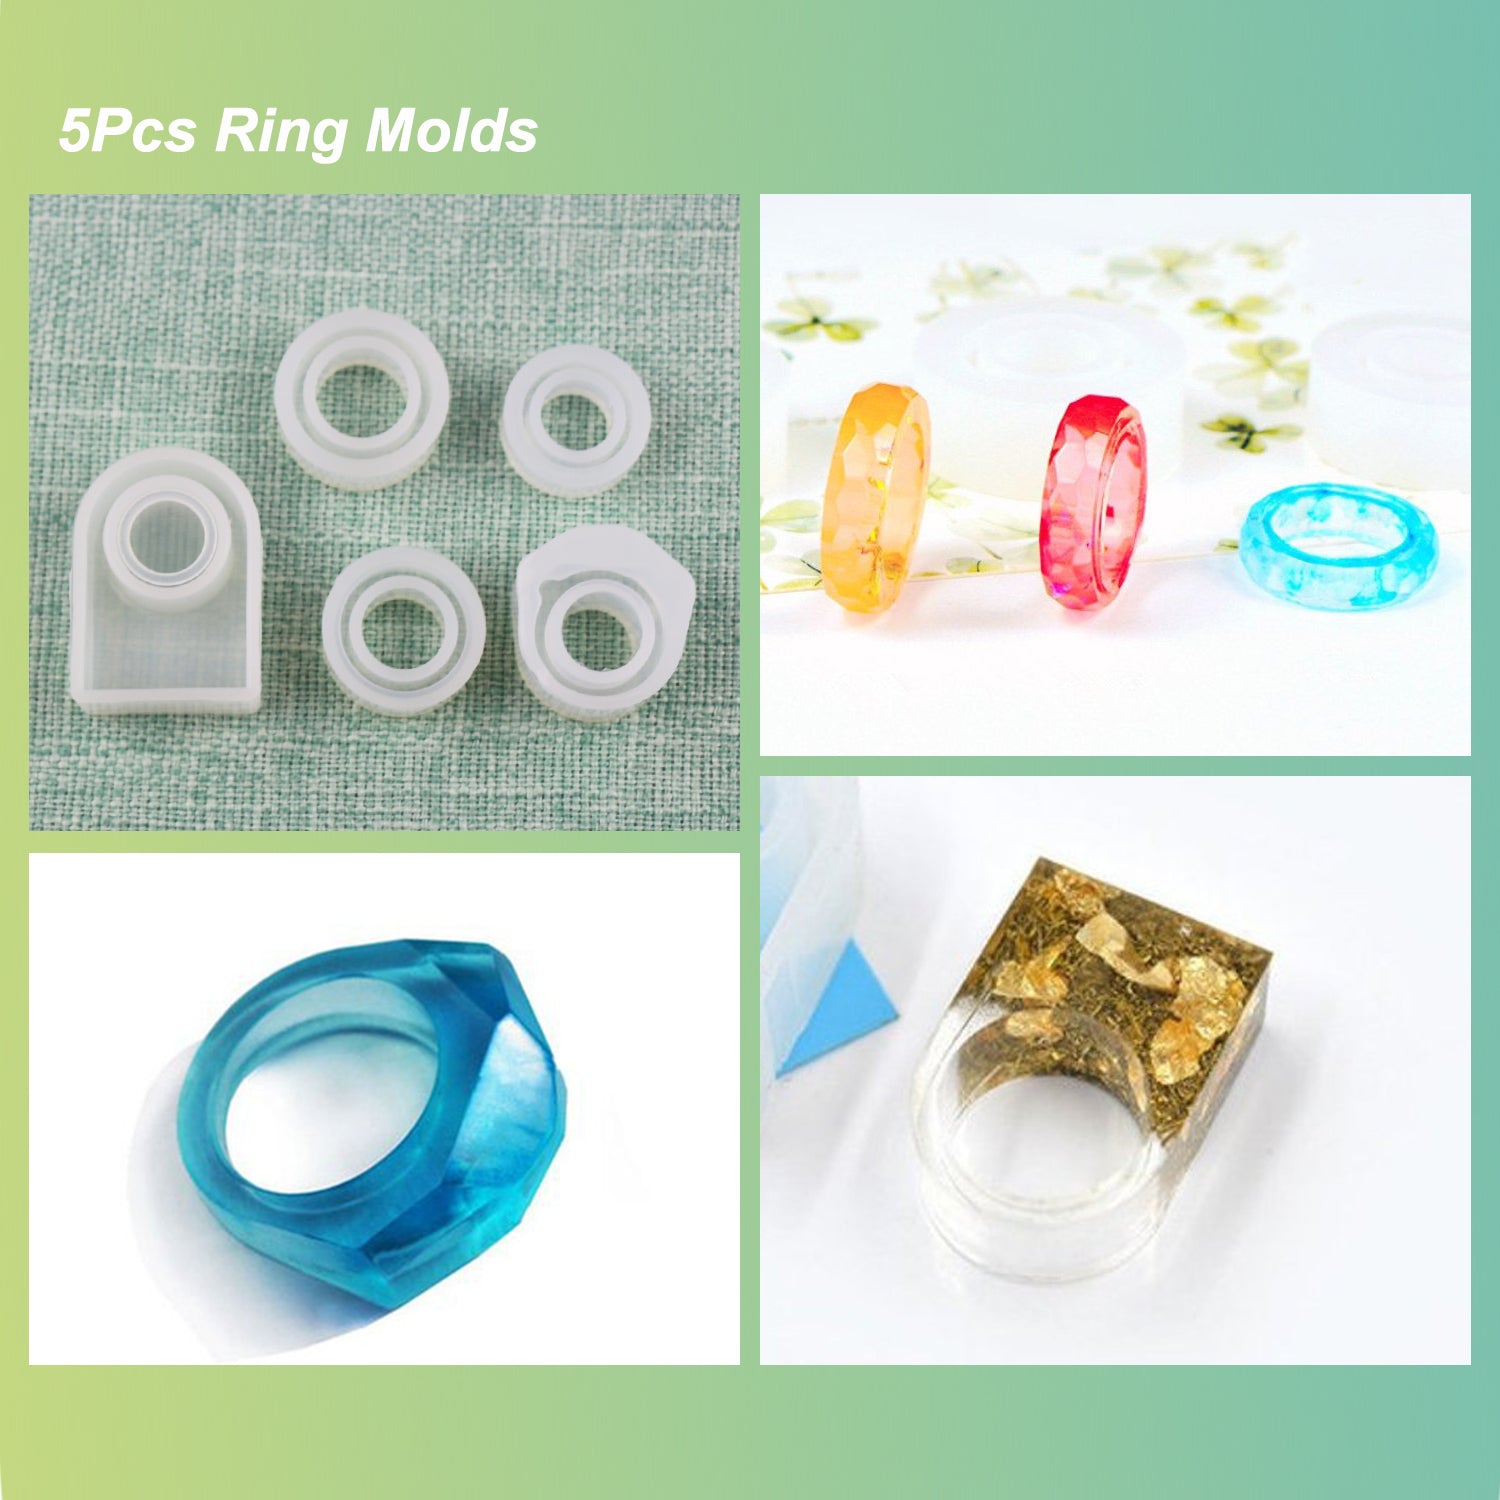 LET'S RESIN 30pcs Resin Jewelry Molds, Jewelry Molds for UV Resin, Resin  Silicone Molds kit with Bracelet Molds,Pendant Molds,Ring Molds for Epoxy